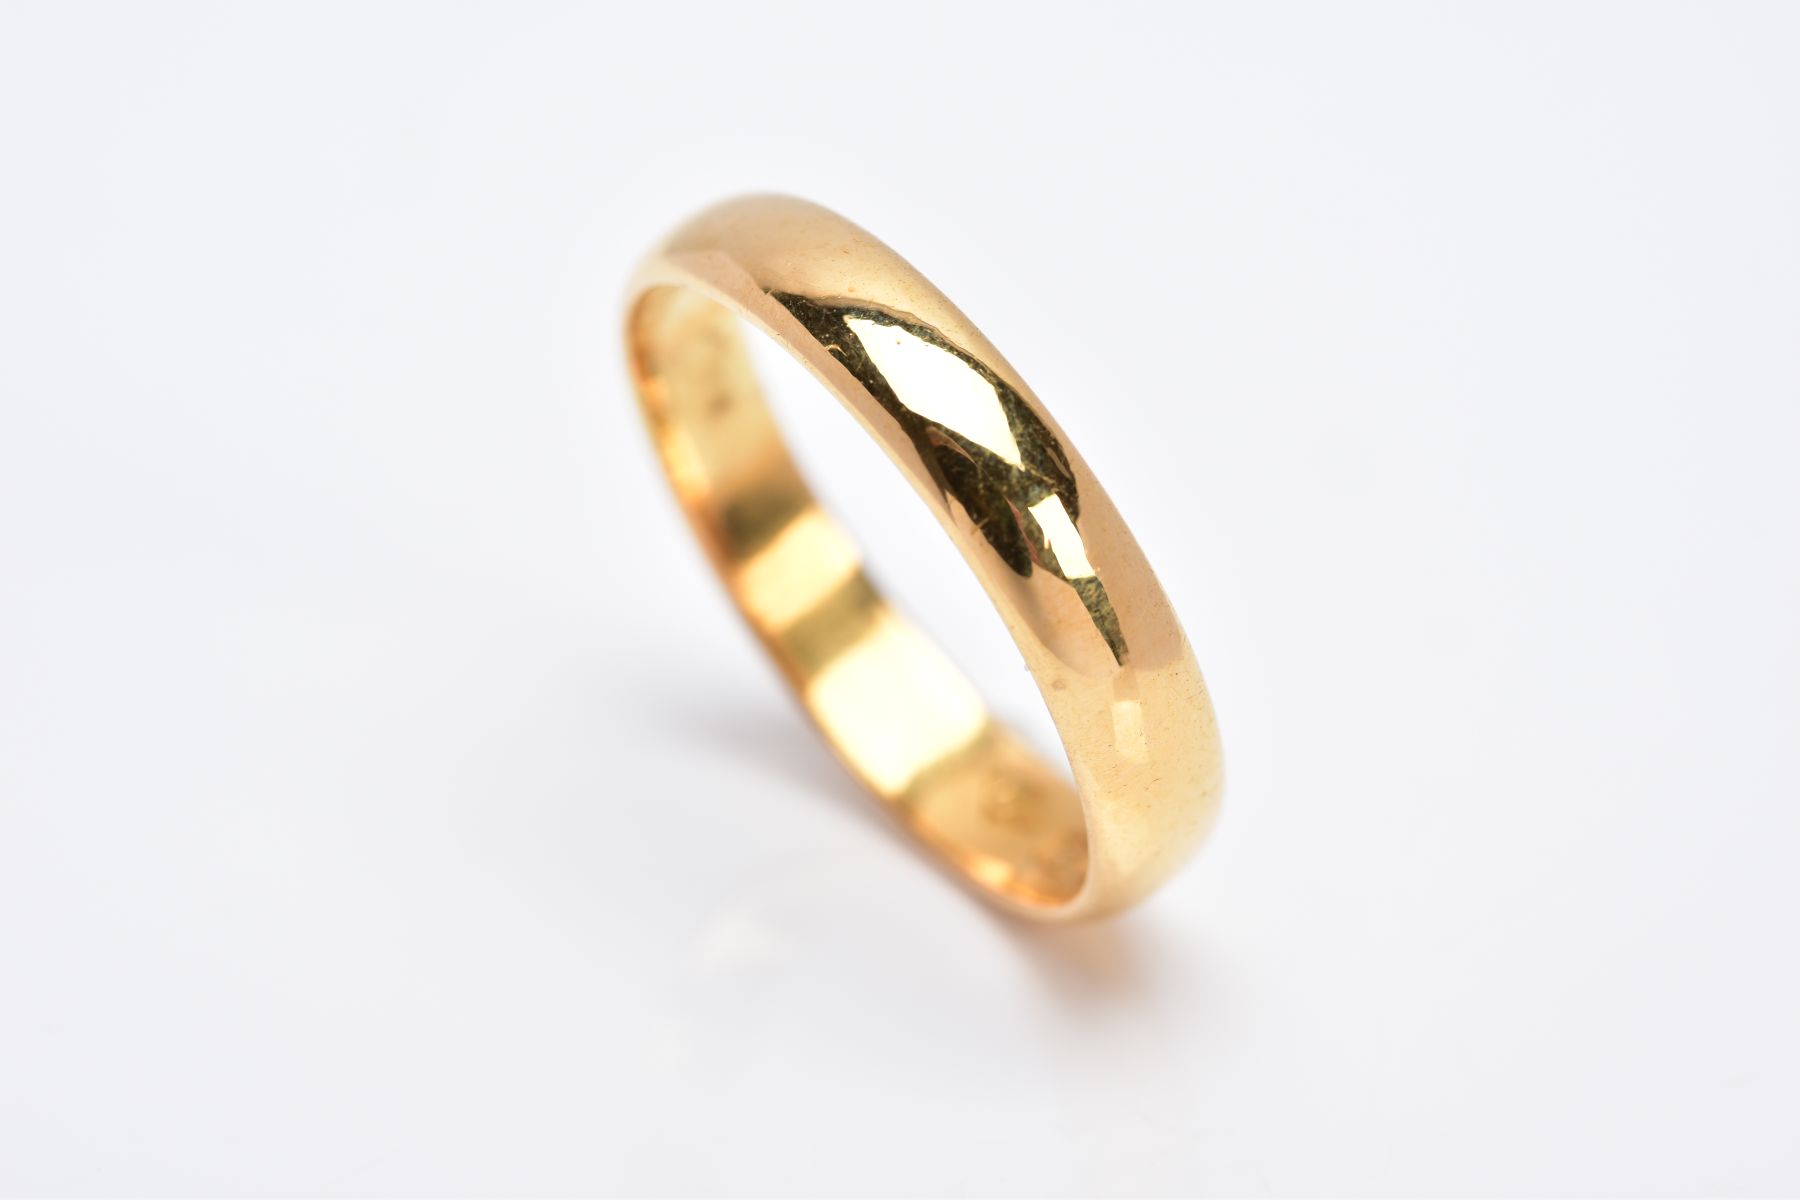 A 22CT GOLD WEDDING BAND, of a plain polished design, approximate width 4.2mm, hallmarked 22ct - Image 3 of 3